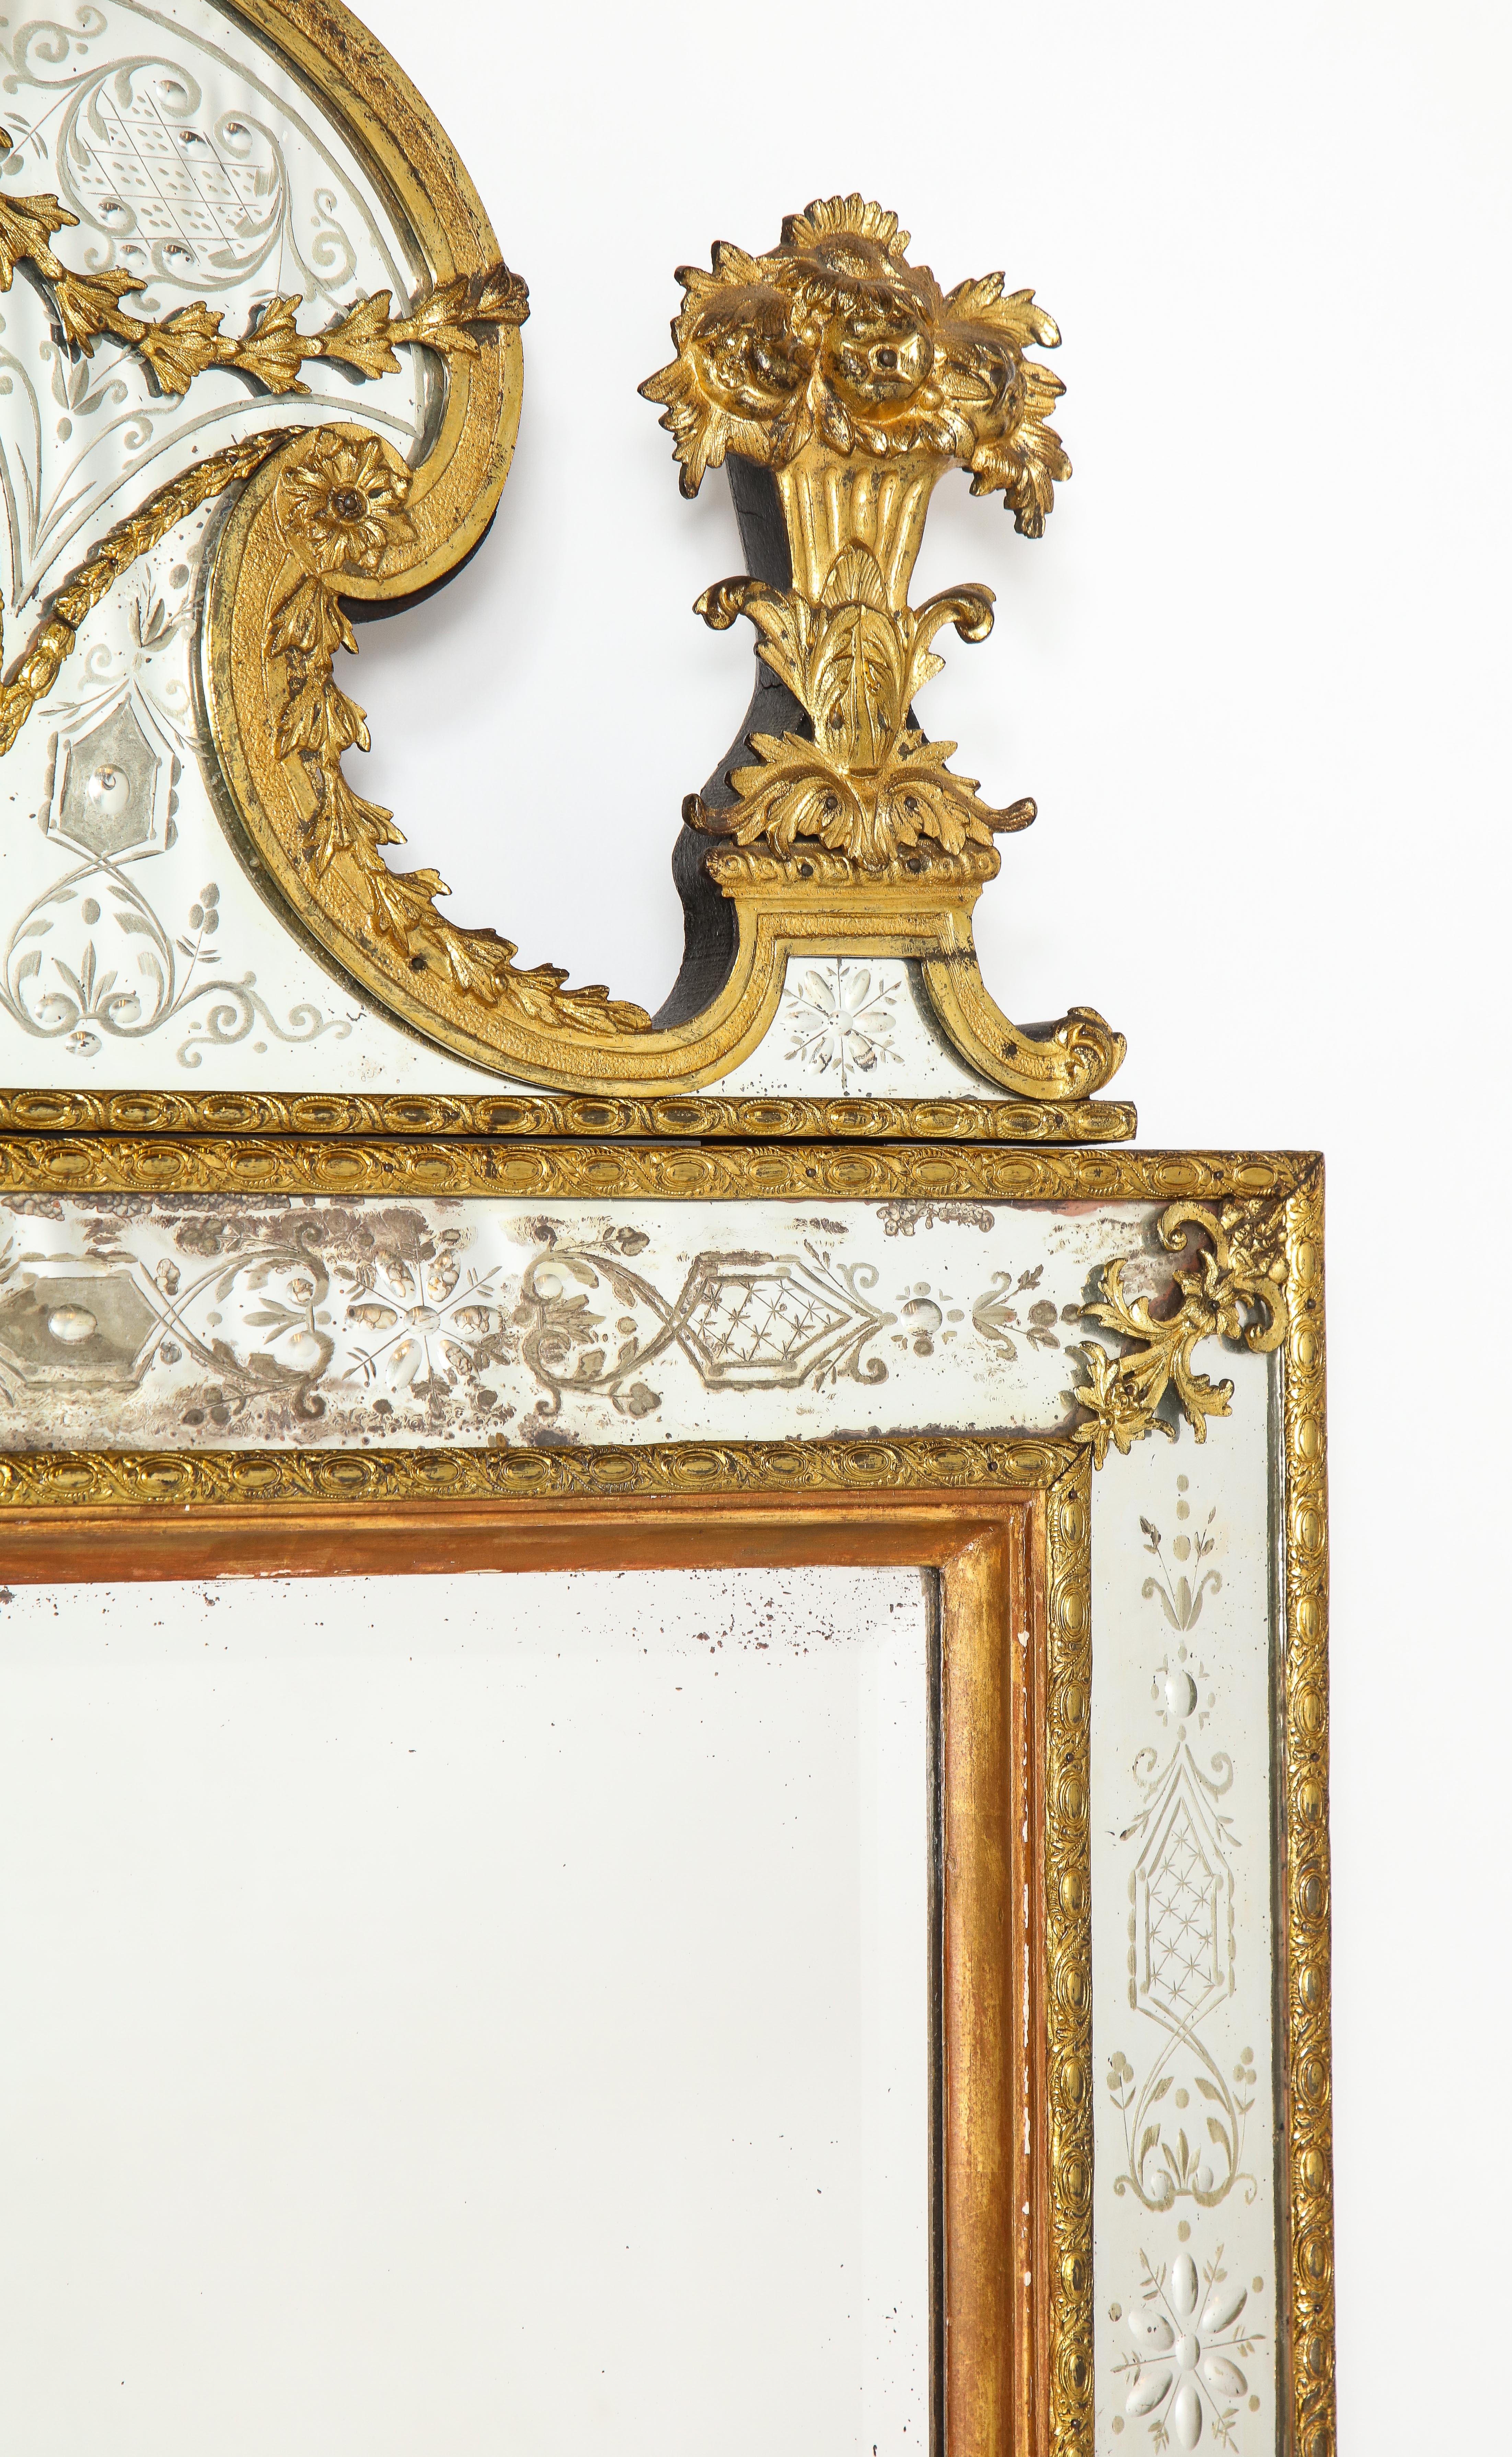 19th Century Two Swedish Ormolu-Mnt. & Hand-Etched Glass Mirrors Aft. Model by Gustav Precht For Sale